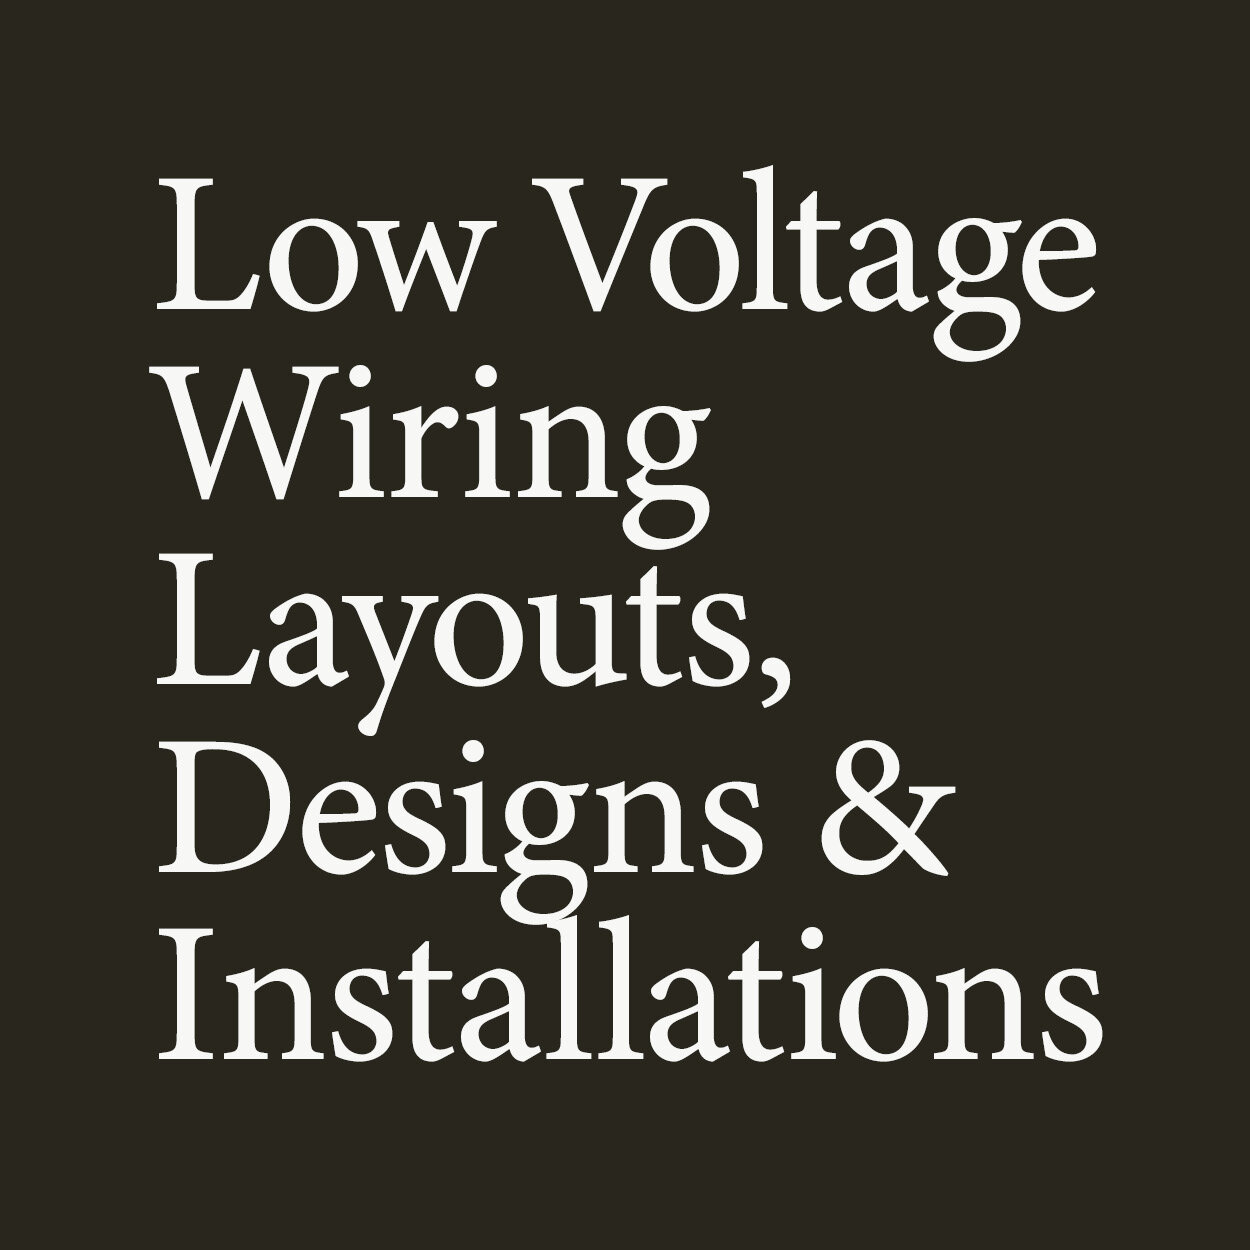 LowVoltageSolutions&Services19.jpg